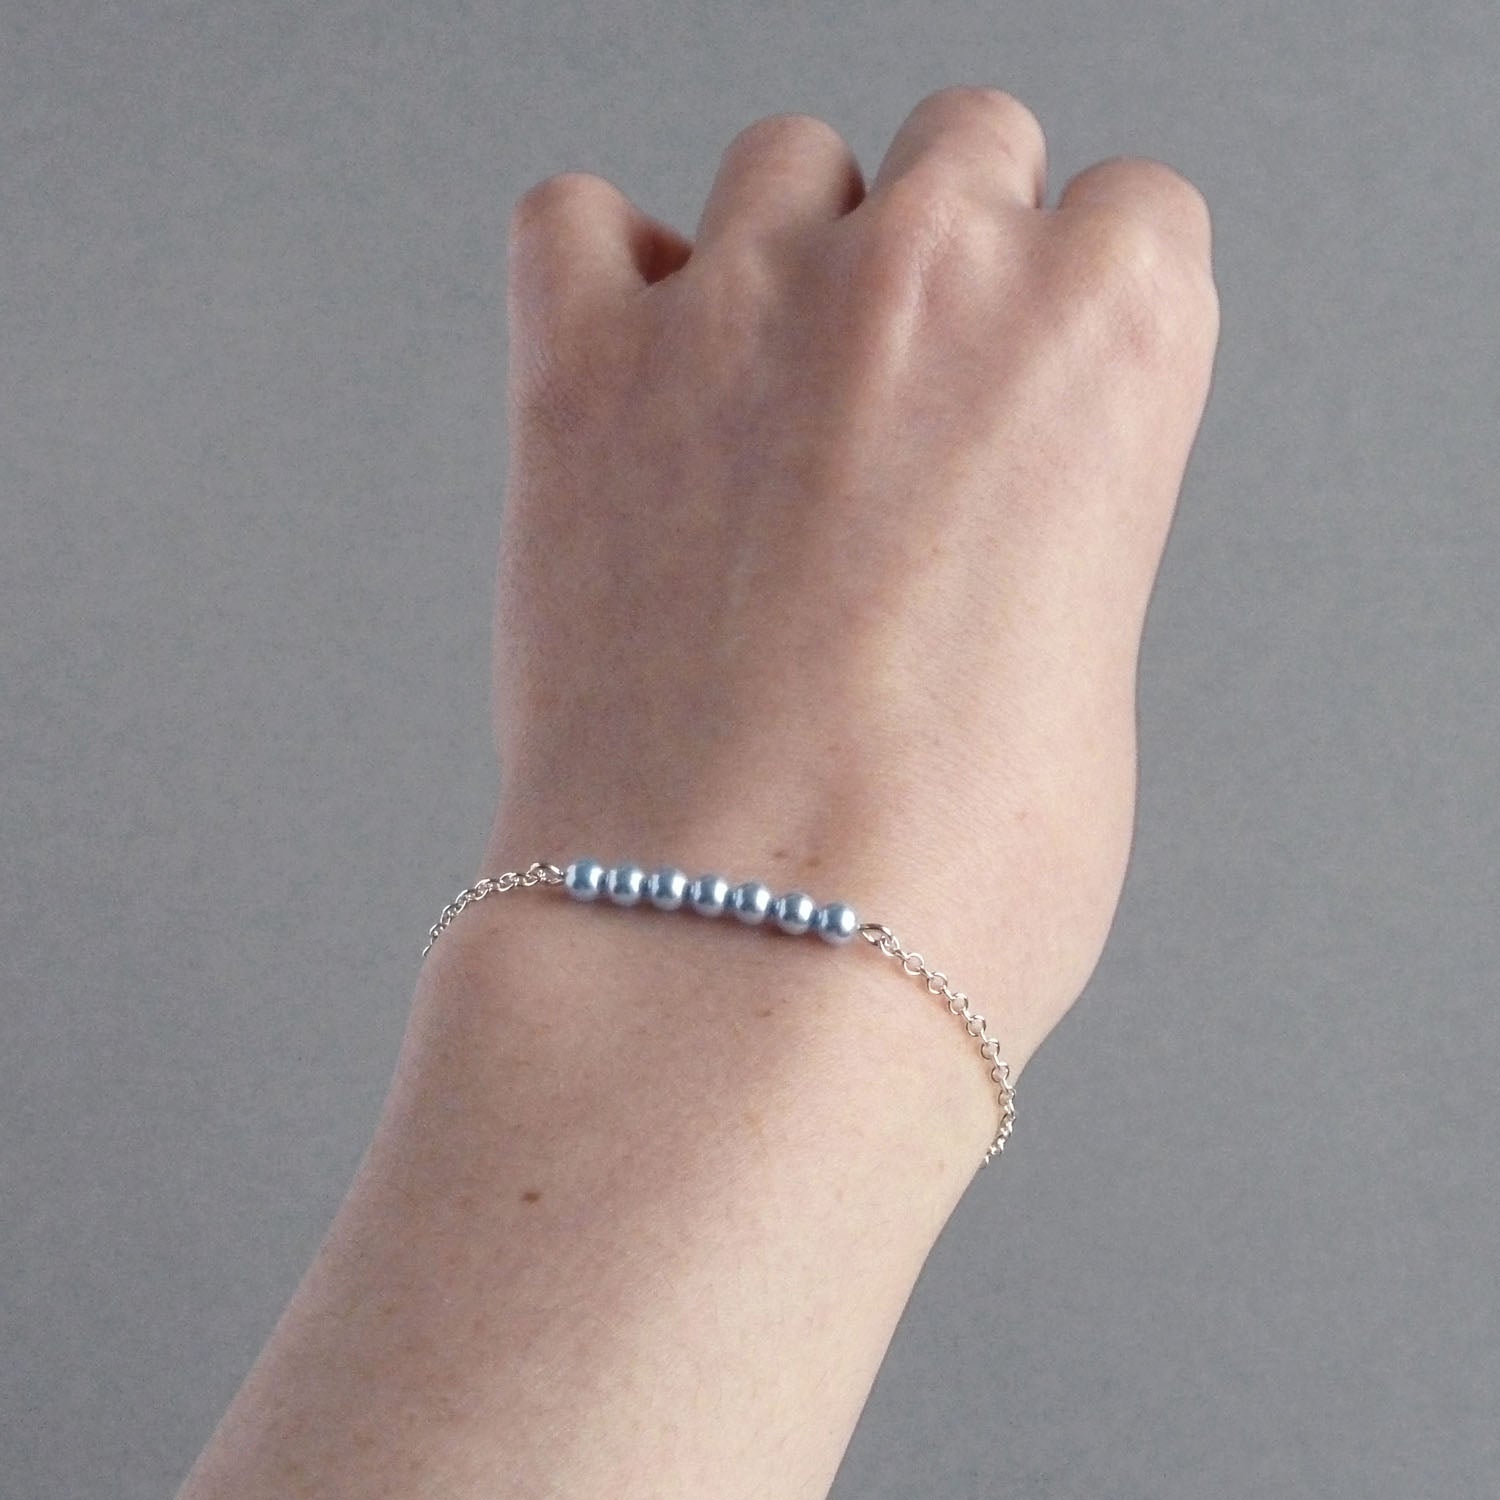 Silver chain and baby blue pearl bracelet